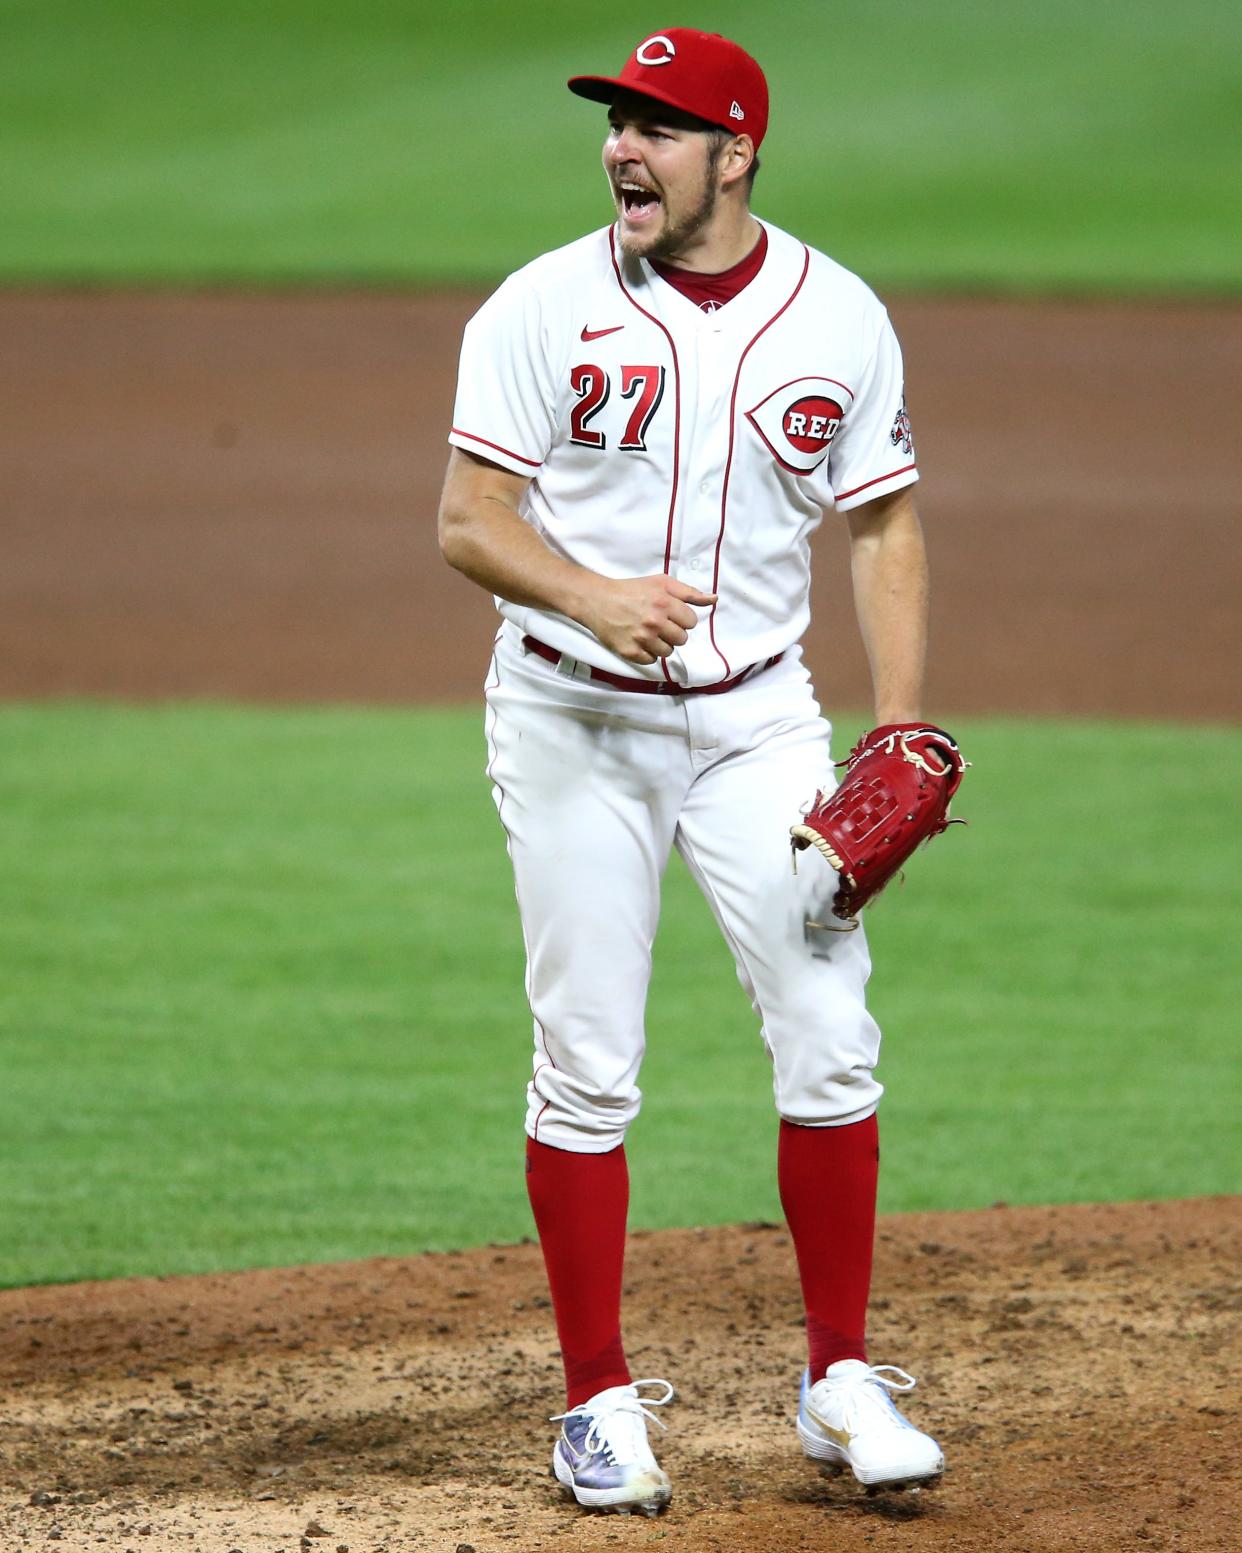 Trevor Bauer during his 2020 Cy Young-winning season for the Reds.